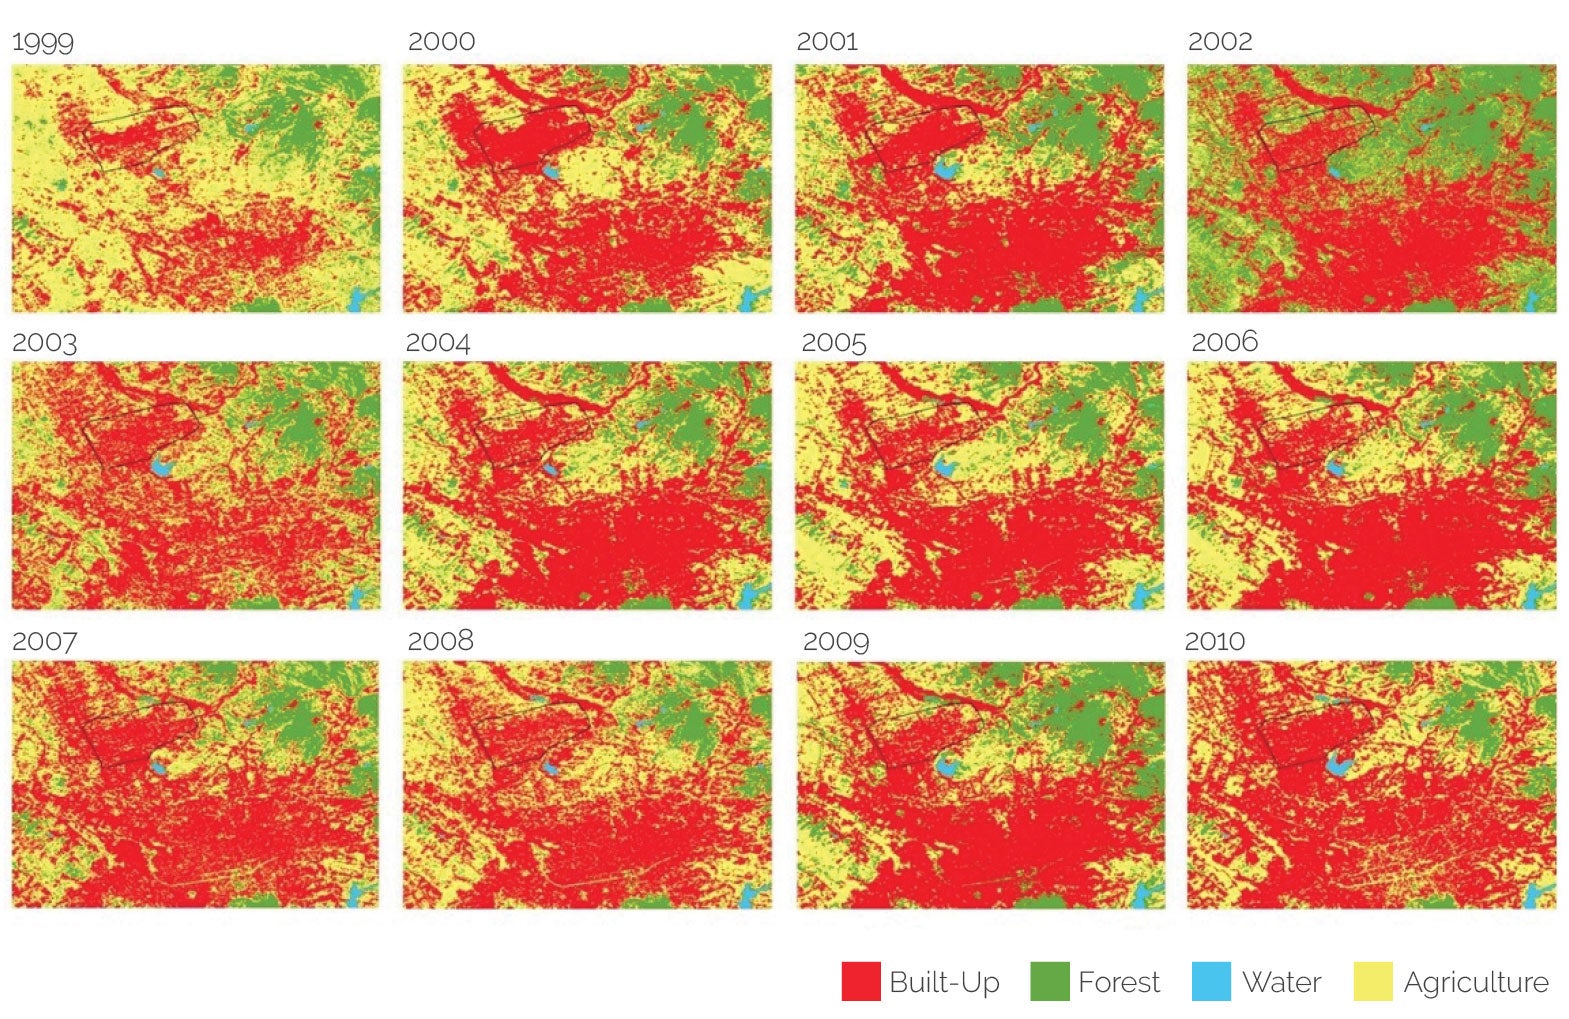 Image: Bathore Land Use/Land Cover Maps Generated Using the Support Vector Machine Model. Source: IEG